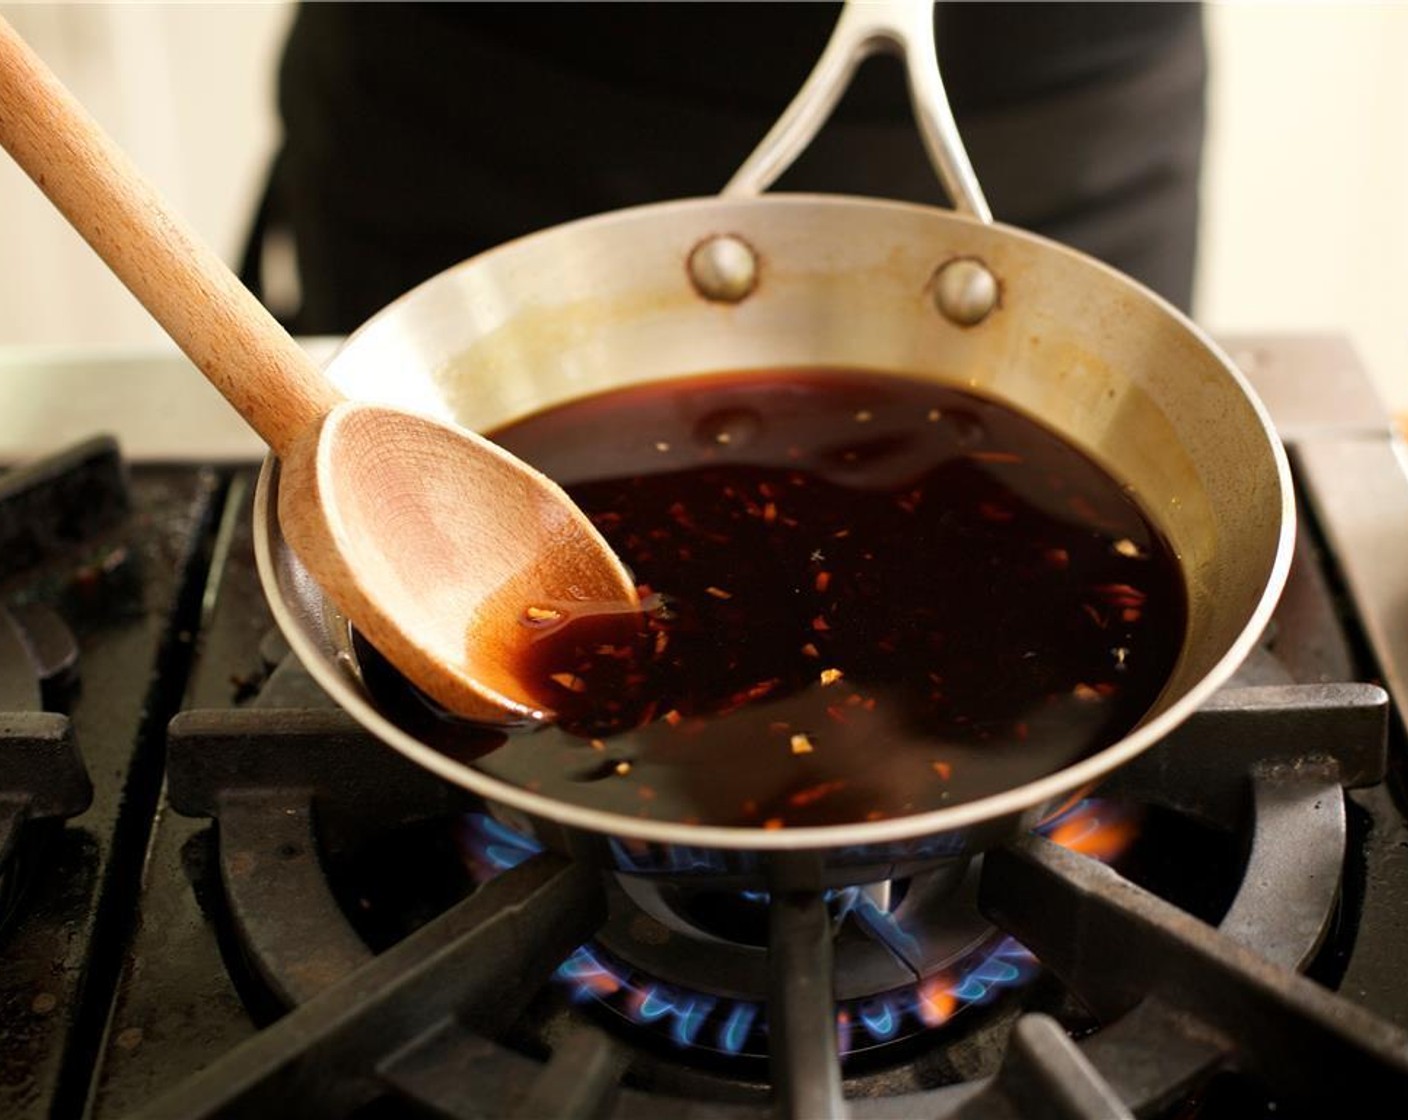 step 5 In the same medium saute pan as the ginger and garlic add the Tamari Soy Sauce (1/2 cup), 1/2 cup of water and the Brown Sugar (1/4 cup) and bring to a simmer over medium heat, stirring occasionally until sugar dissolves. Bring the sauce to a quick boil, stir and then remove from heat.